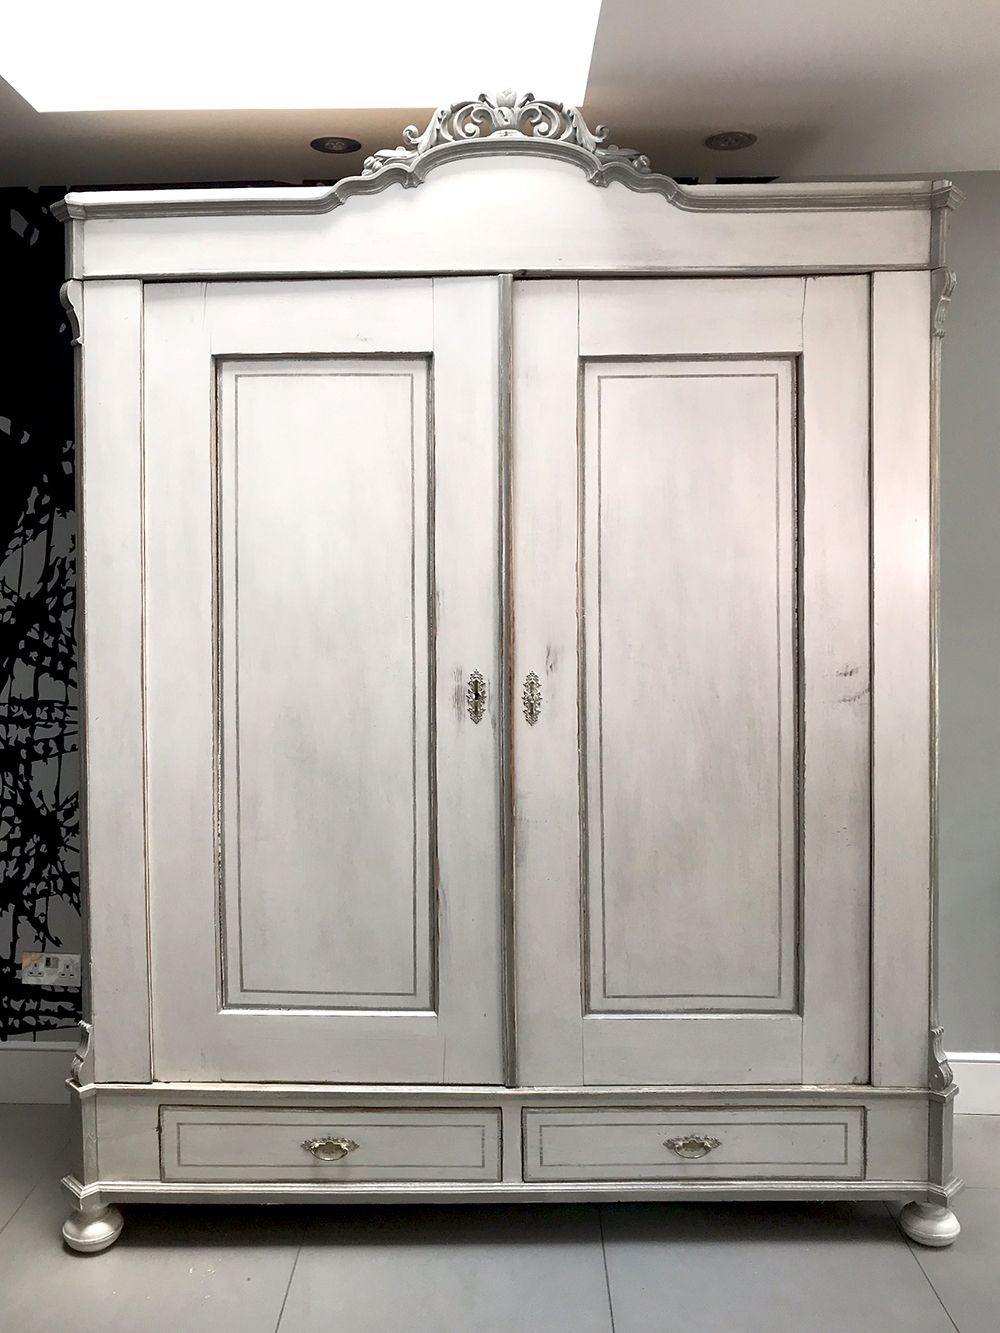 Antique French Painted Armoire – Sold | Napoleonrockefeller – Vintage And  Retro Furniture, Bespoke Hand Crafted Chairs And Seating In White Vintage Wardrobes (Gallery 13 of 20)